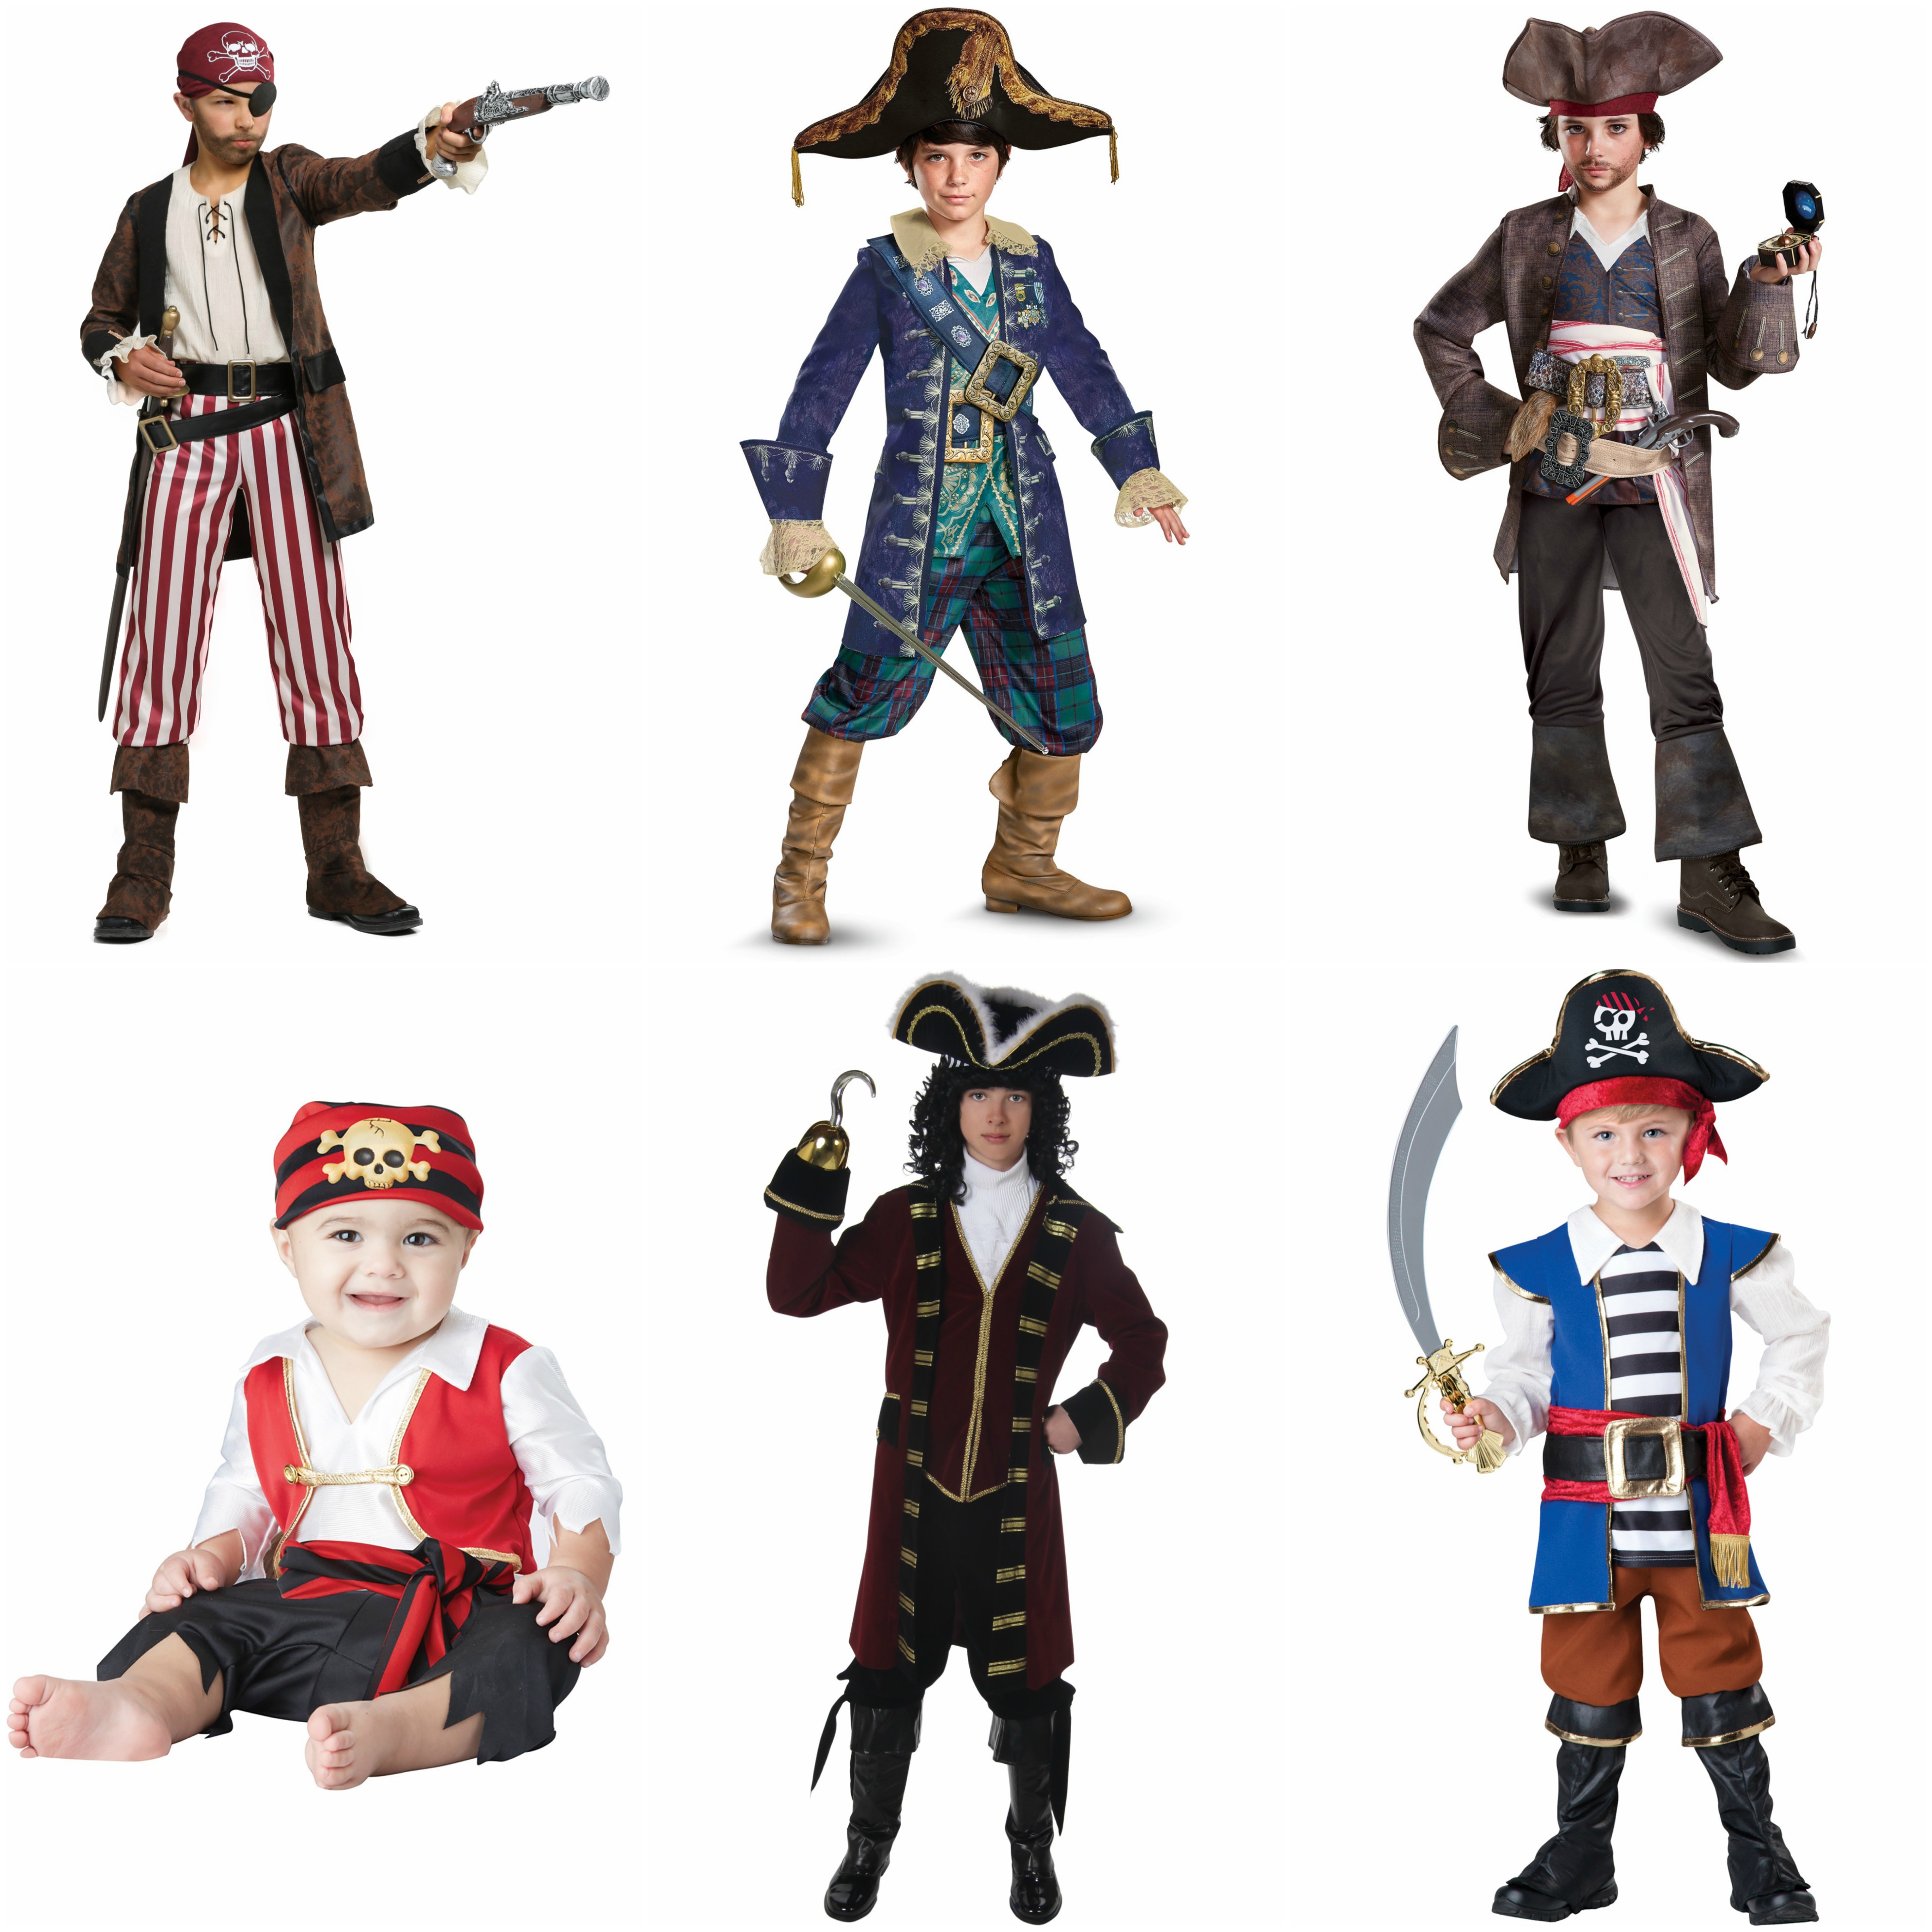 Pirate costumes for boys